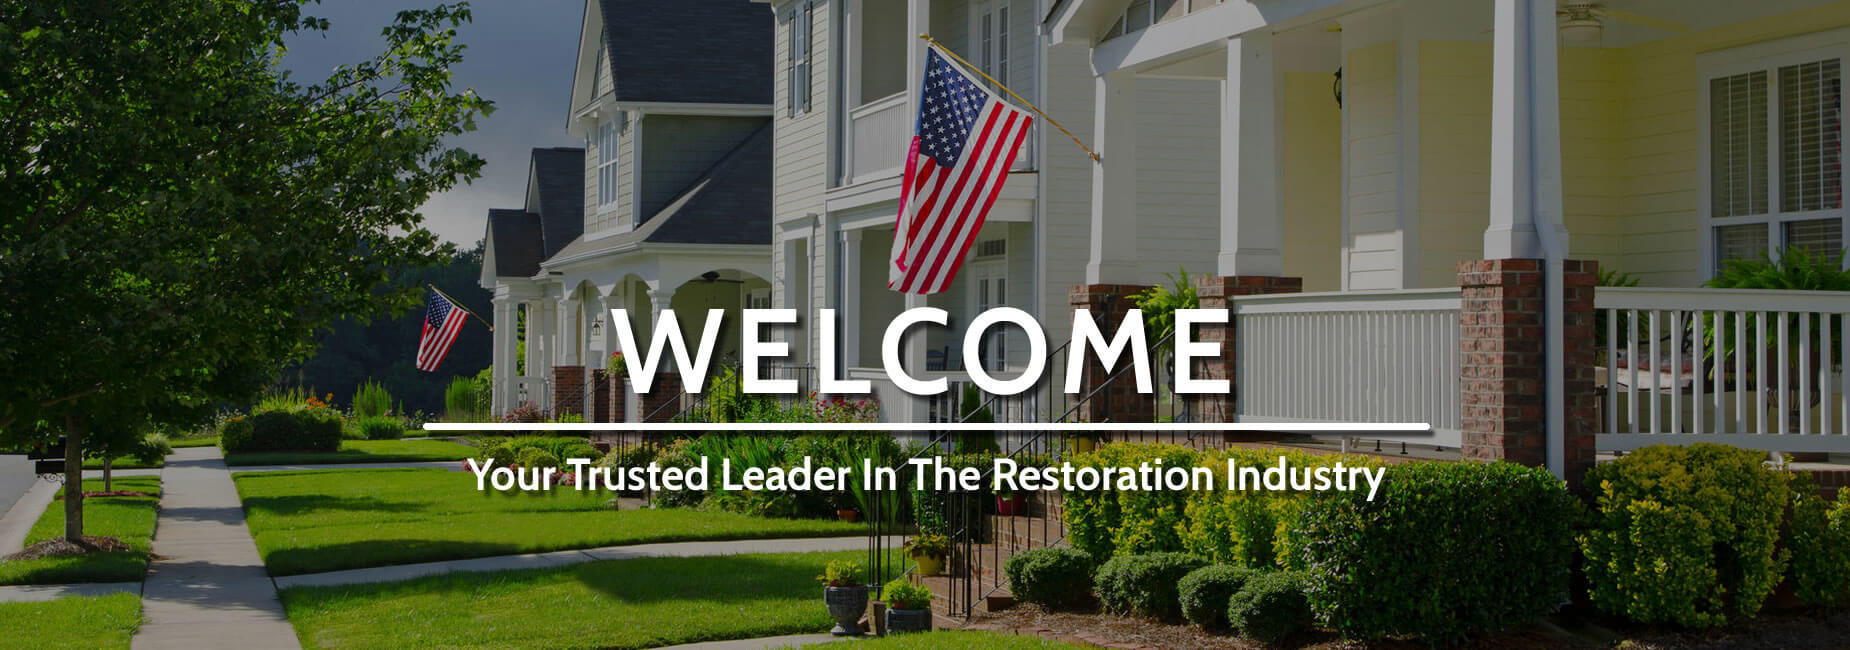 Welcome - Your Trusted Leader In The Restoration Industry